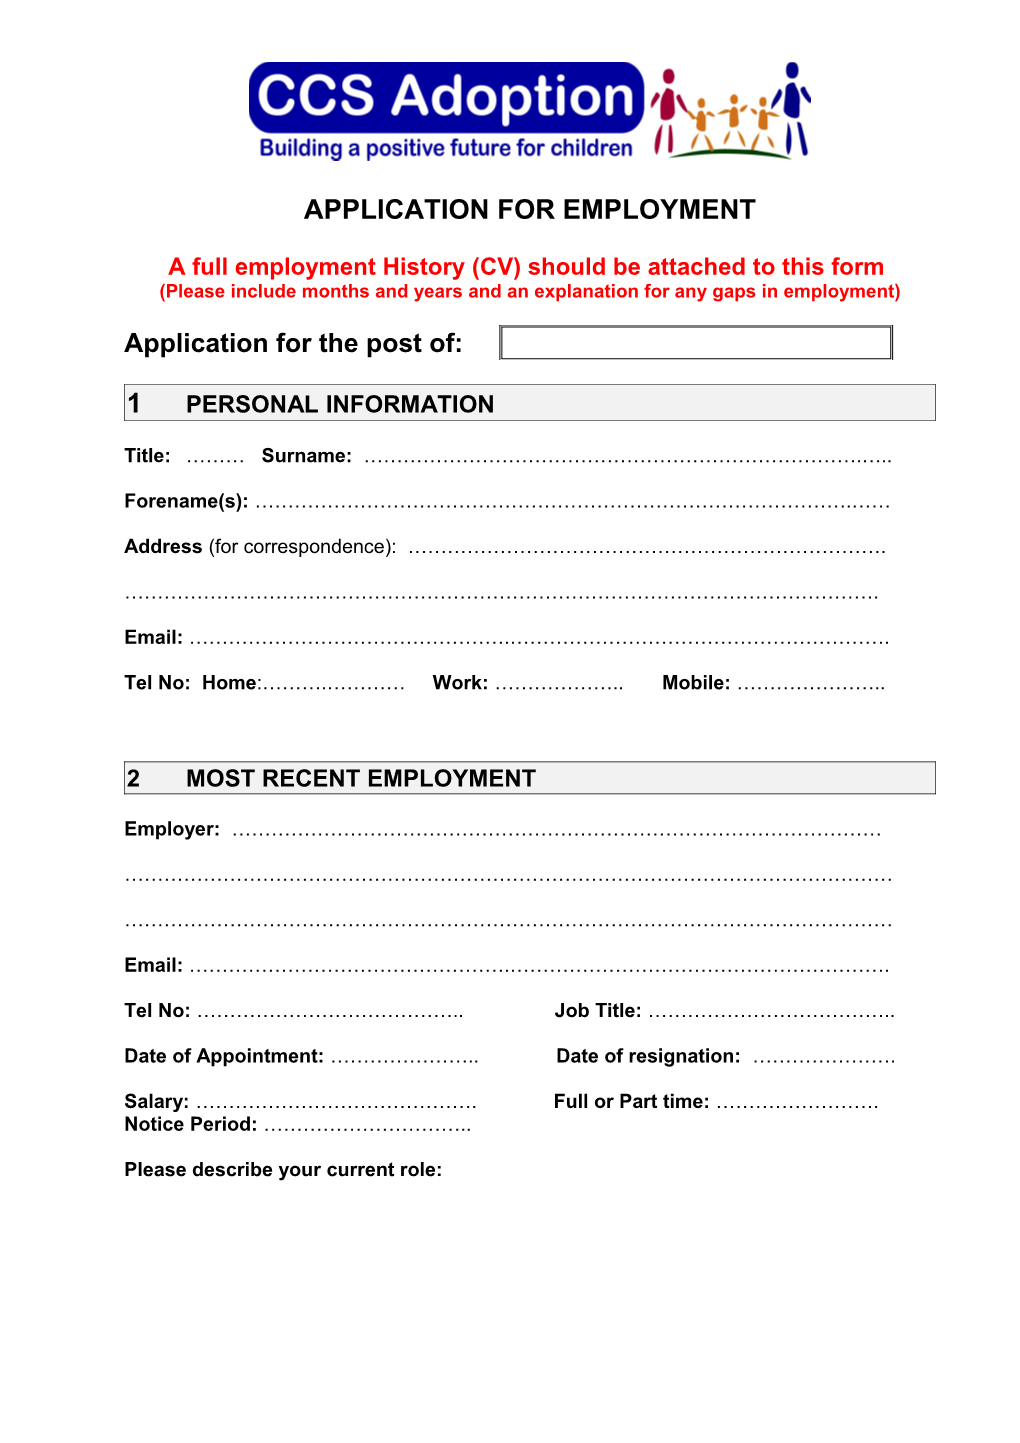 A Full Employment History (CV) Should Be Attached to This Form